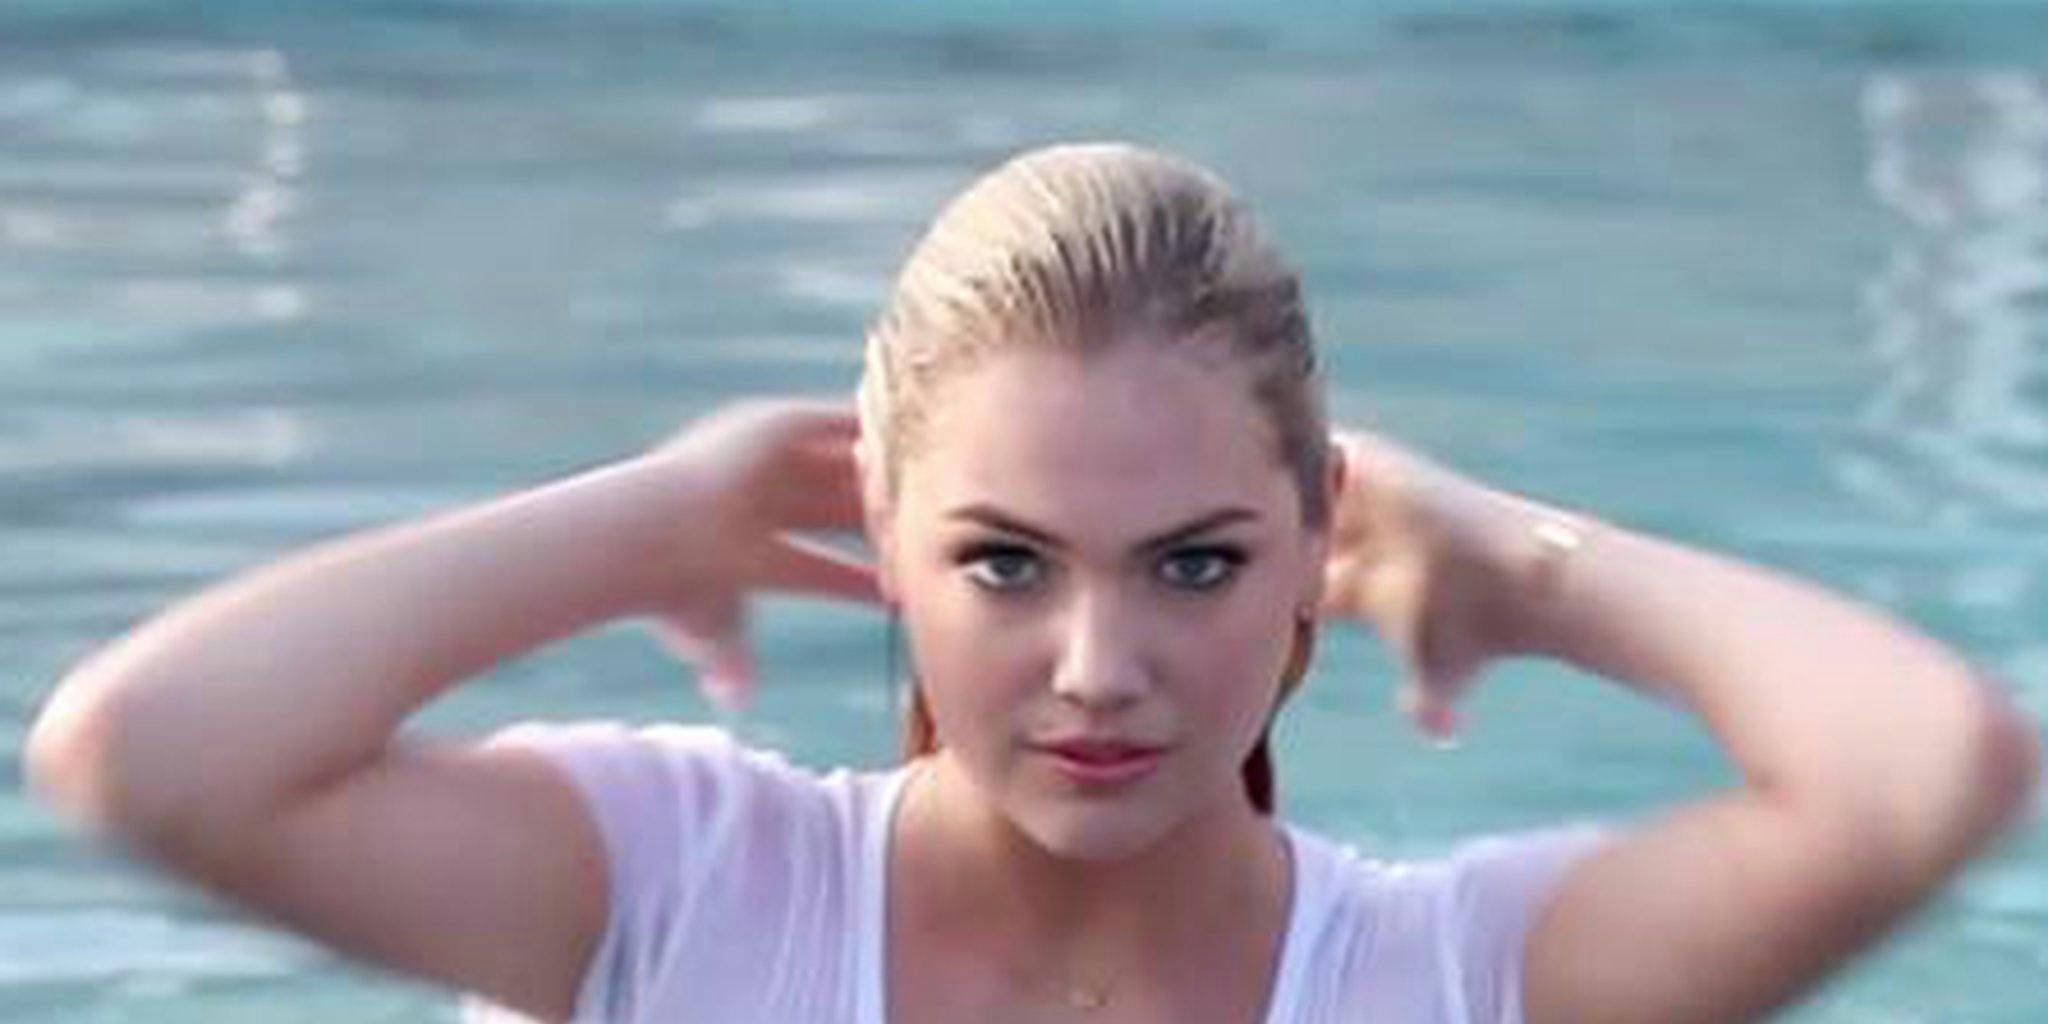 Kate Upton video stripped from YouTube - The Daily Dot